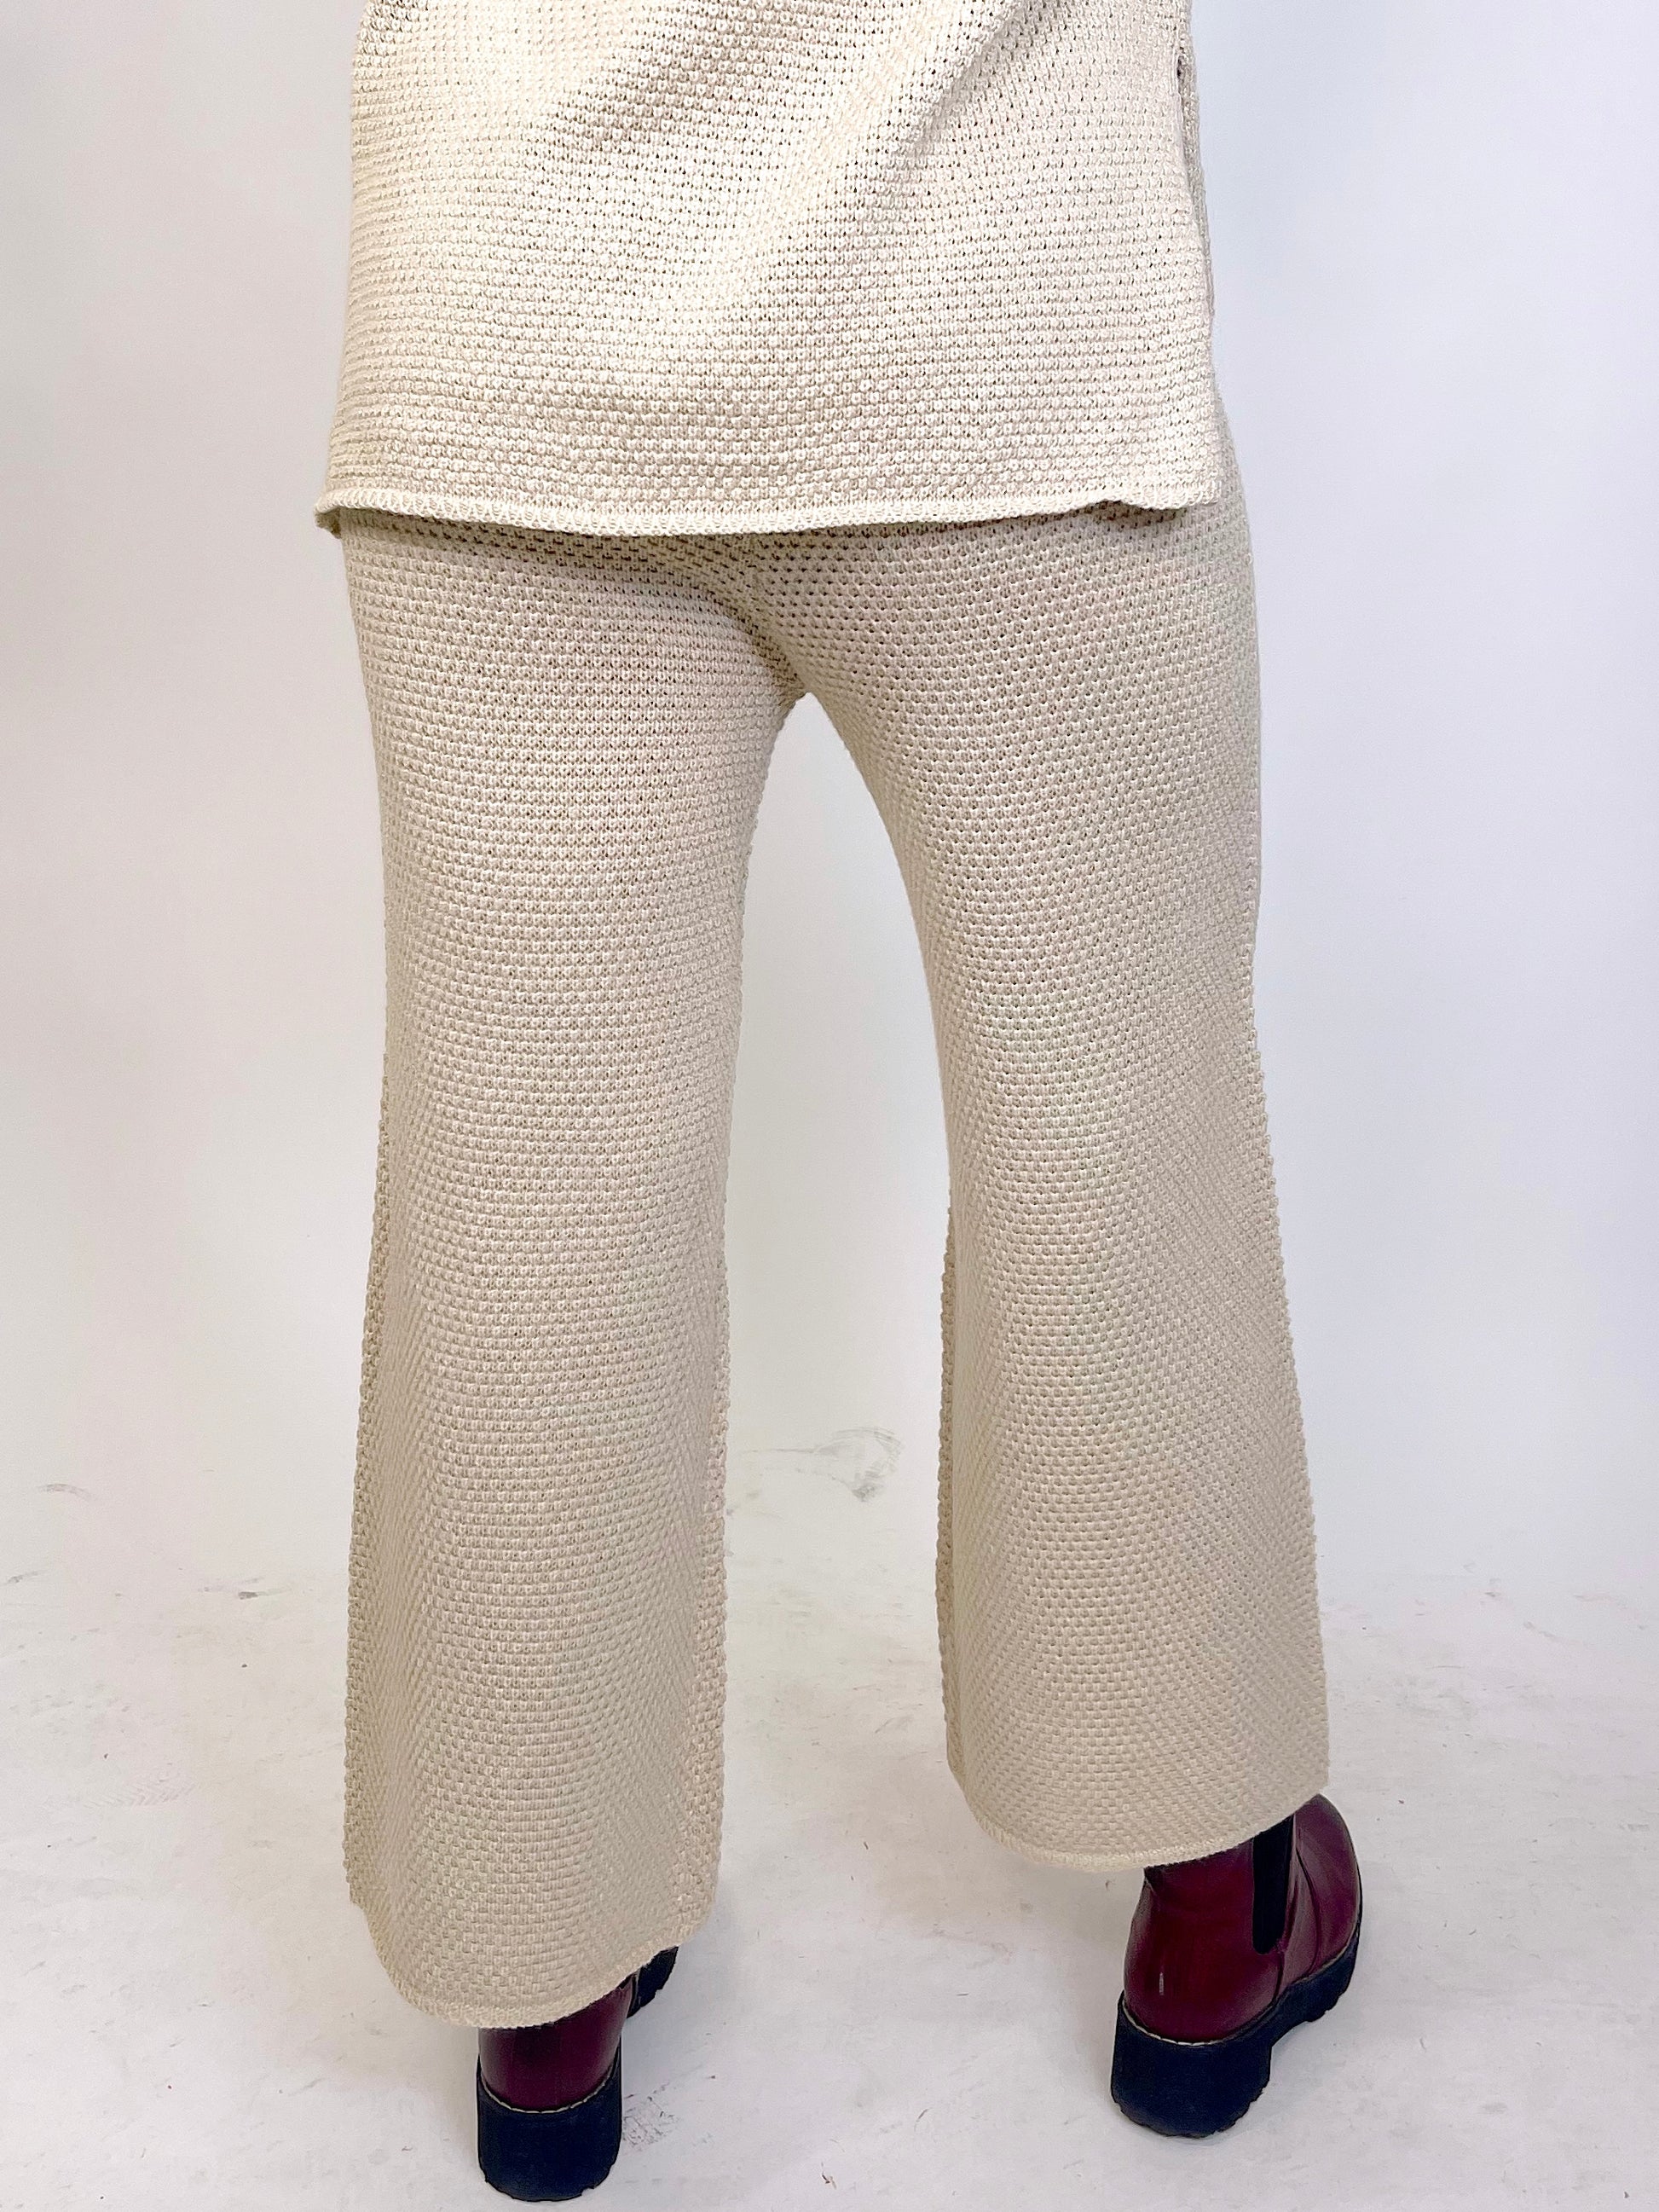 The Lola Bottoms-Lounge Pants-Wishlist-The Village Shoppe, Women’s Fashion Boutique, Shop Online and In Store - Located in Muscle Shoals, AL.